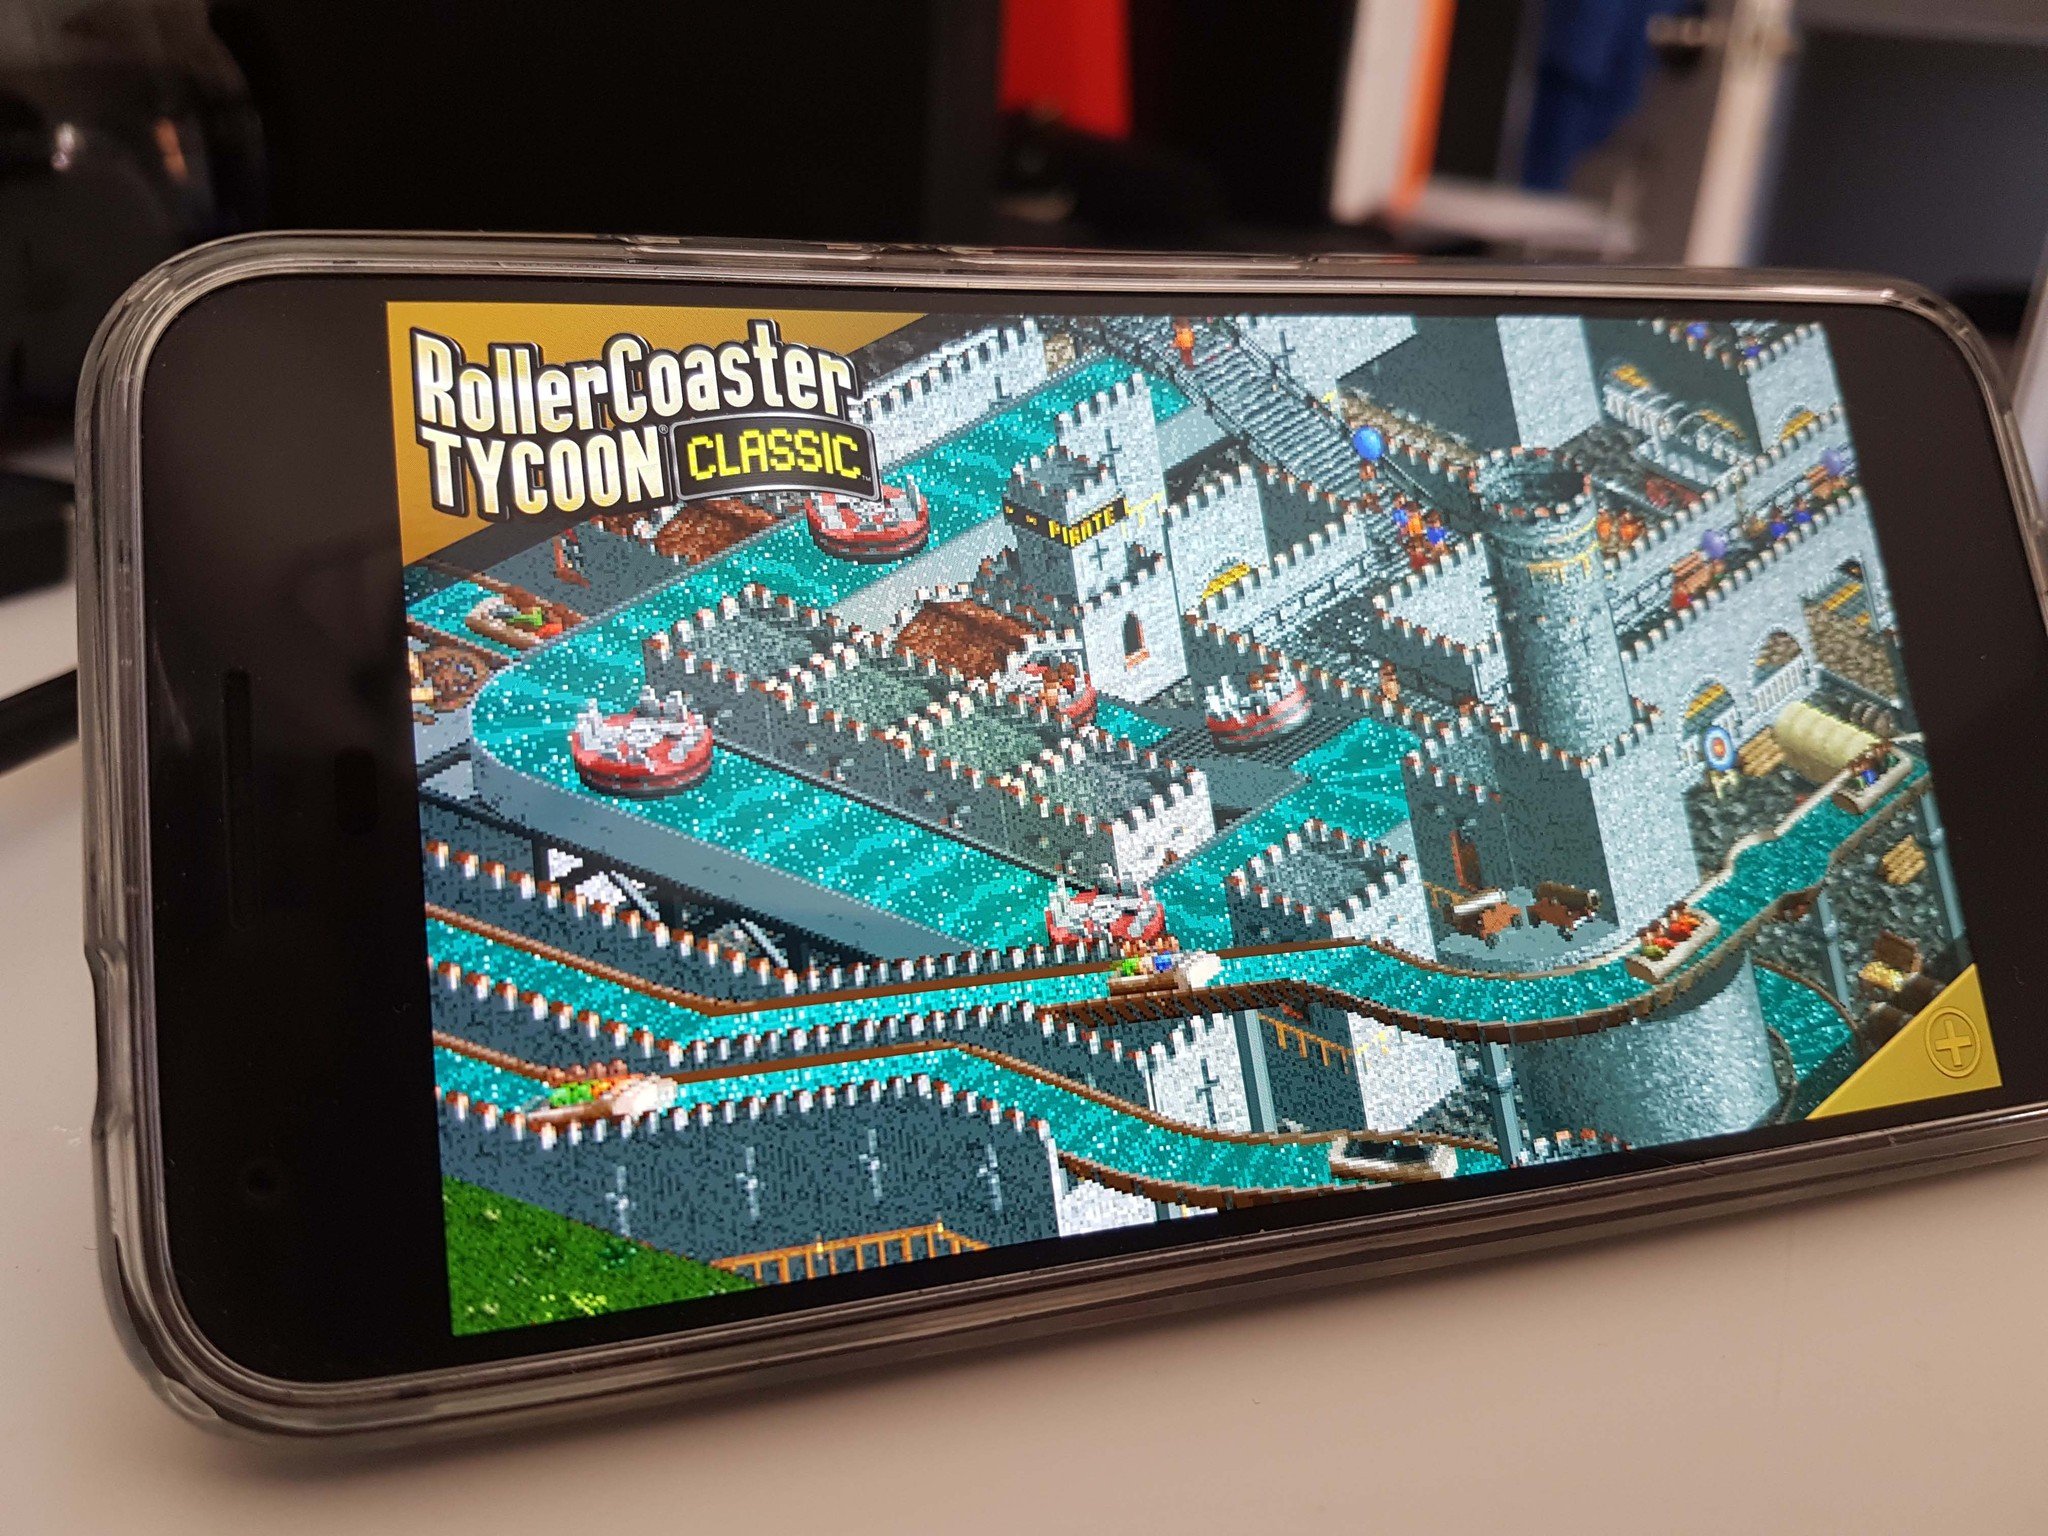 Rollercoaster Tycoon 4 Mobile review